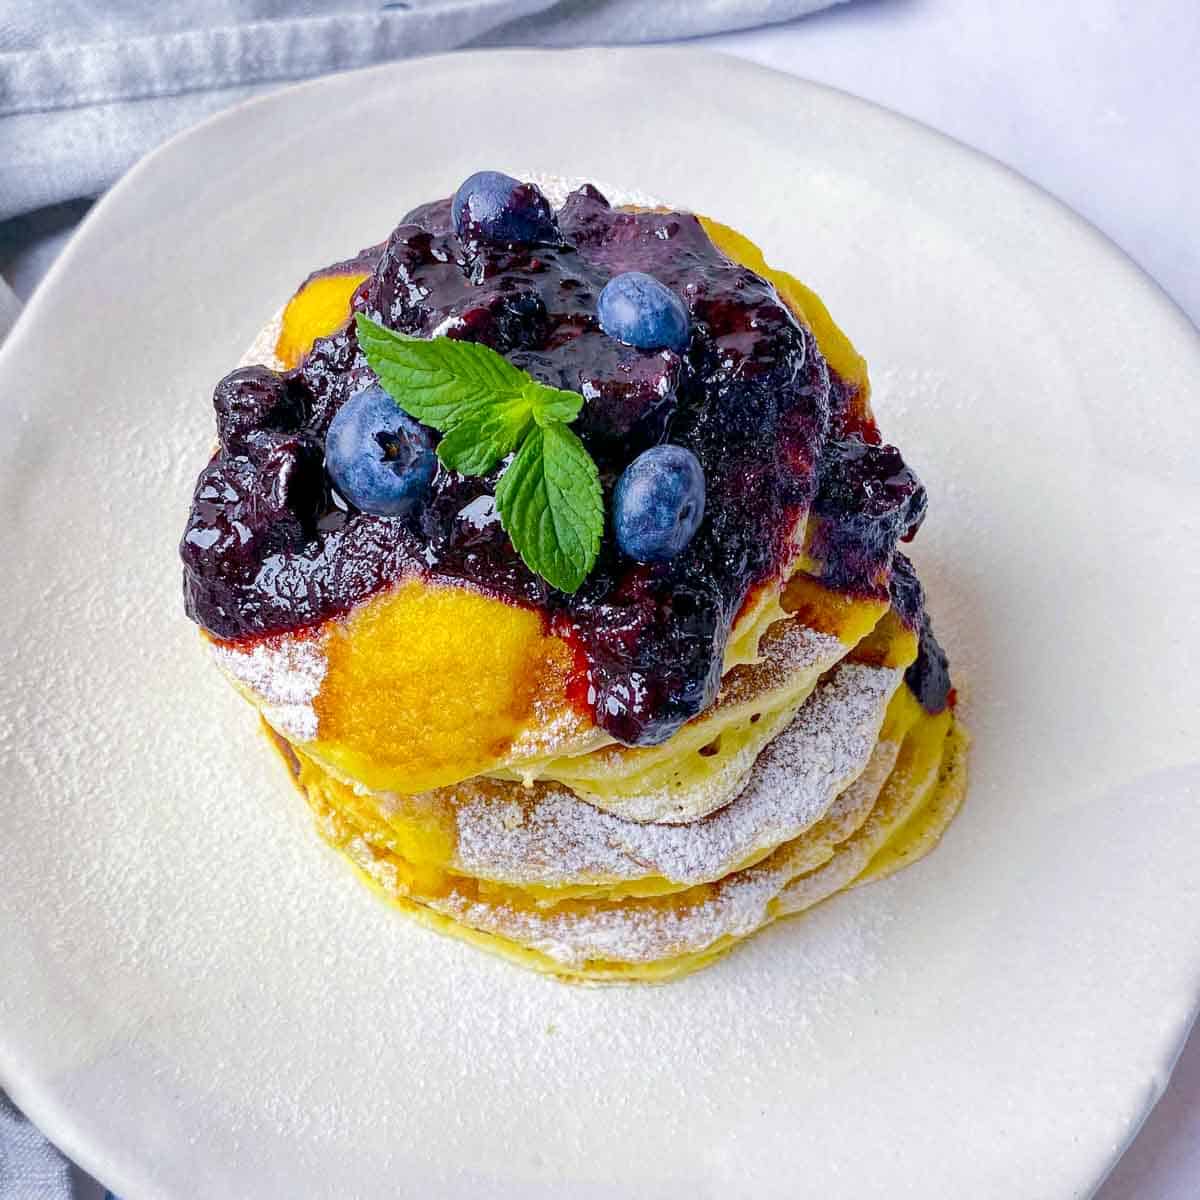 A stack of fluffy lemon ricotta pancakes on a white plate, garnished with blueberry compote.